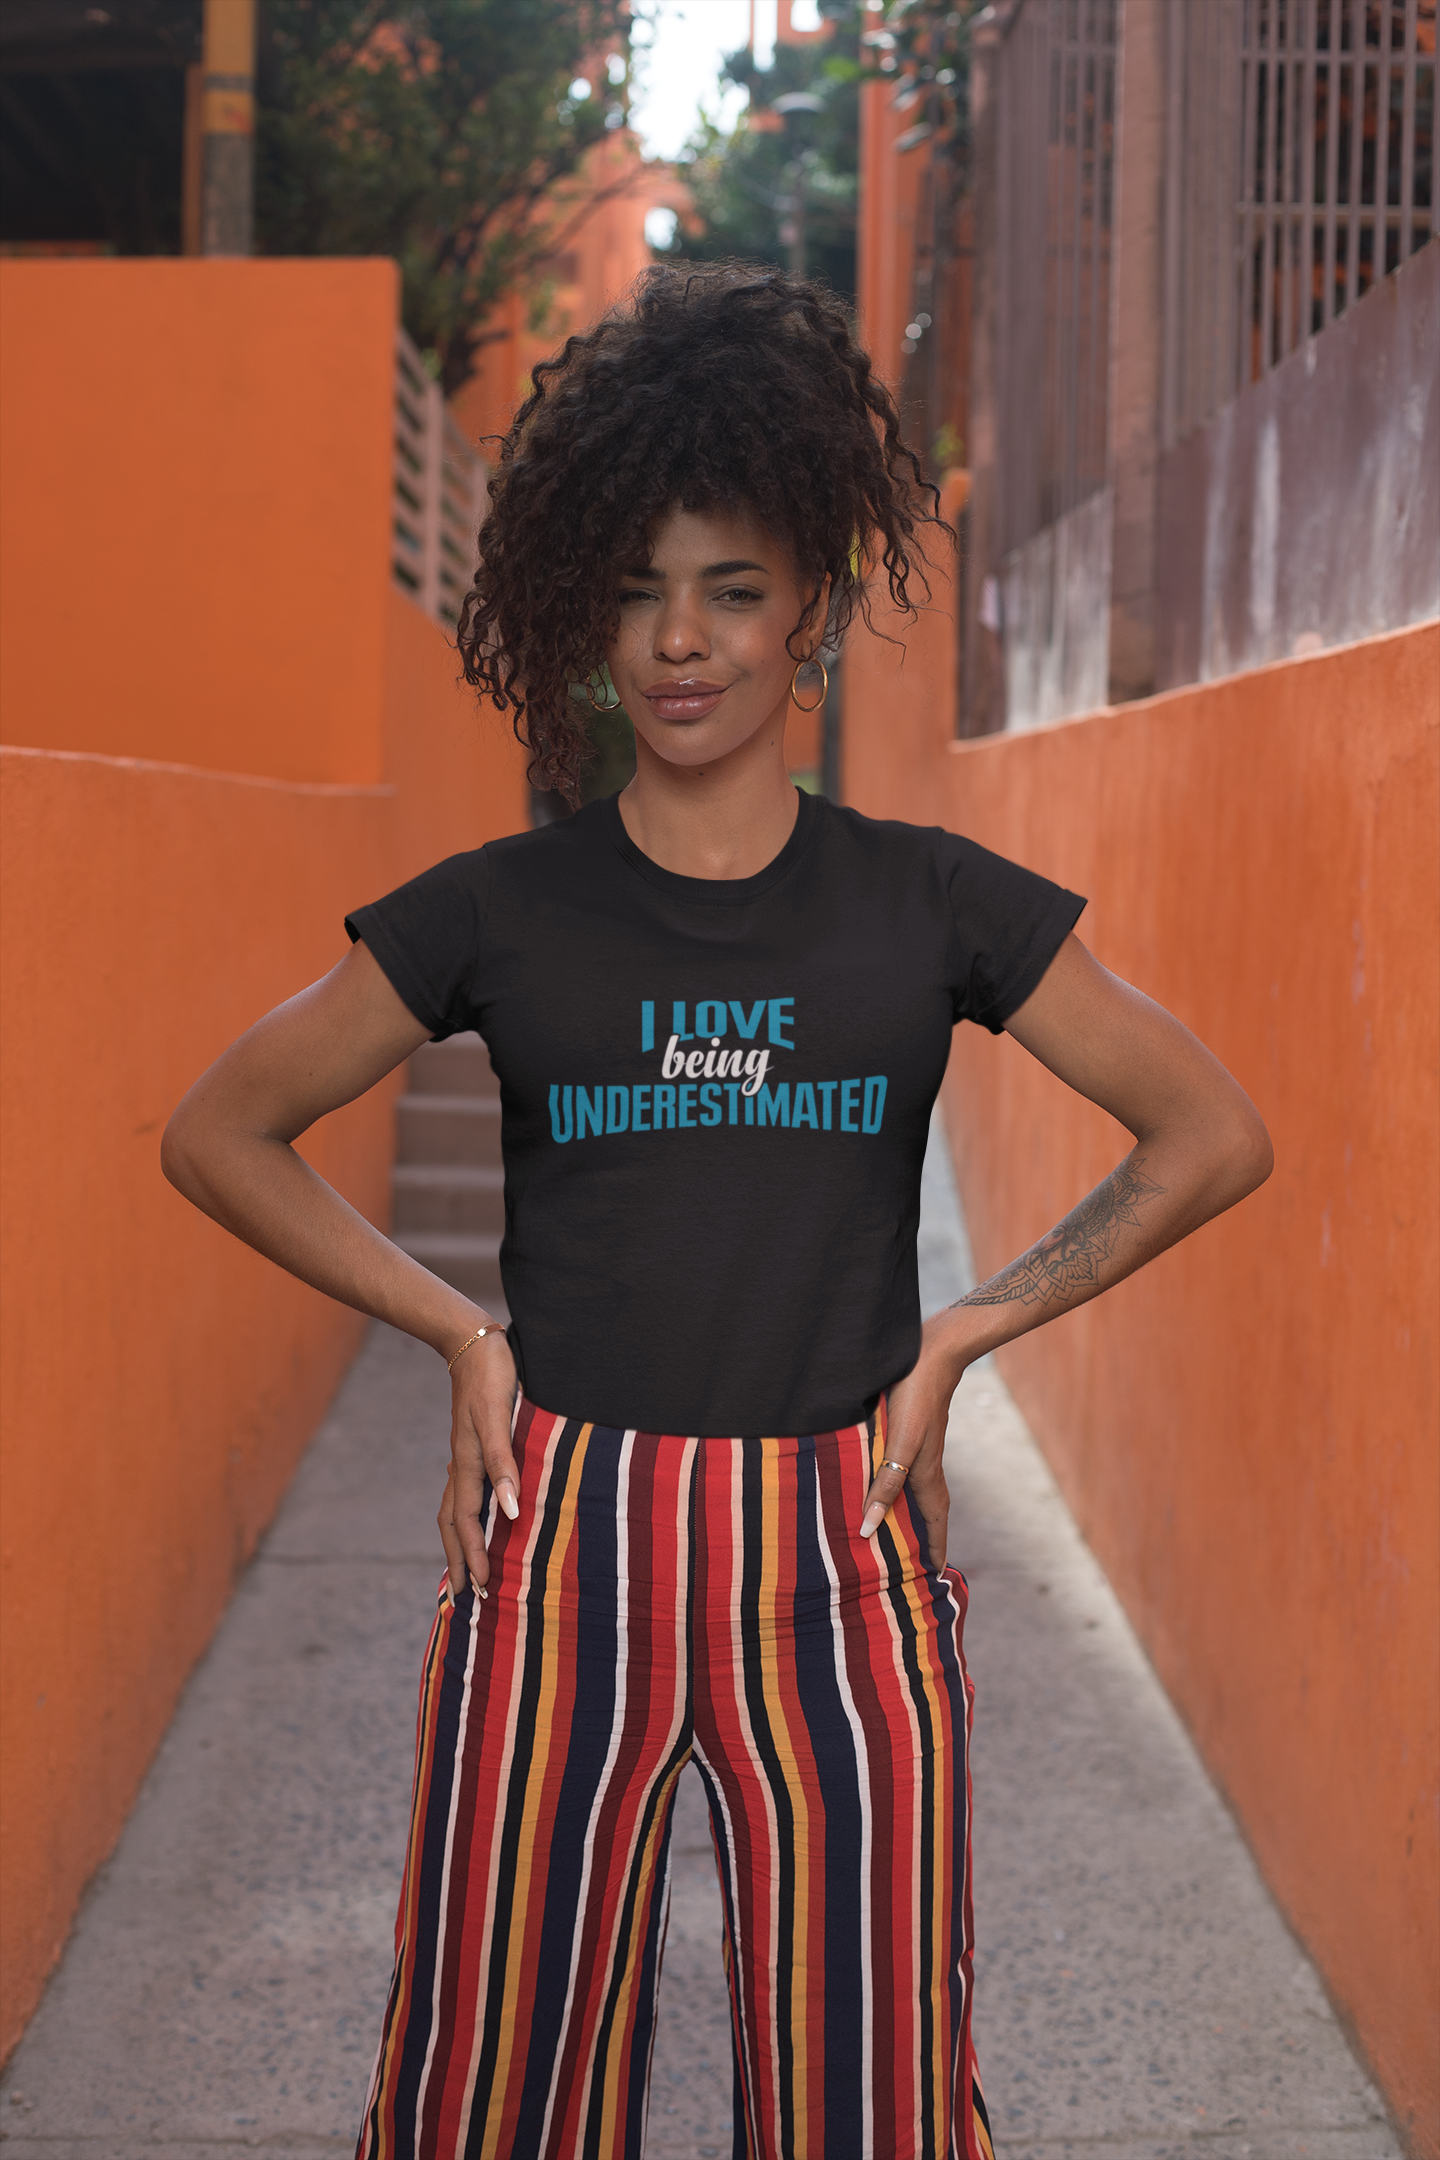 A woman wearing a black "I Love Being Underestimated" t-shirt by Sharp Tact Kreativ and striped pants.